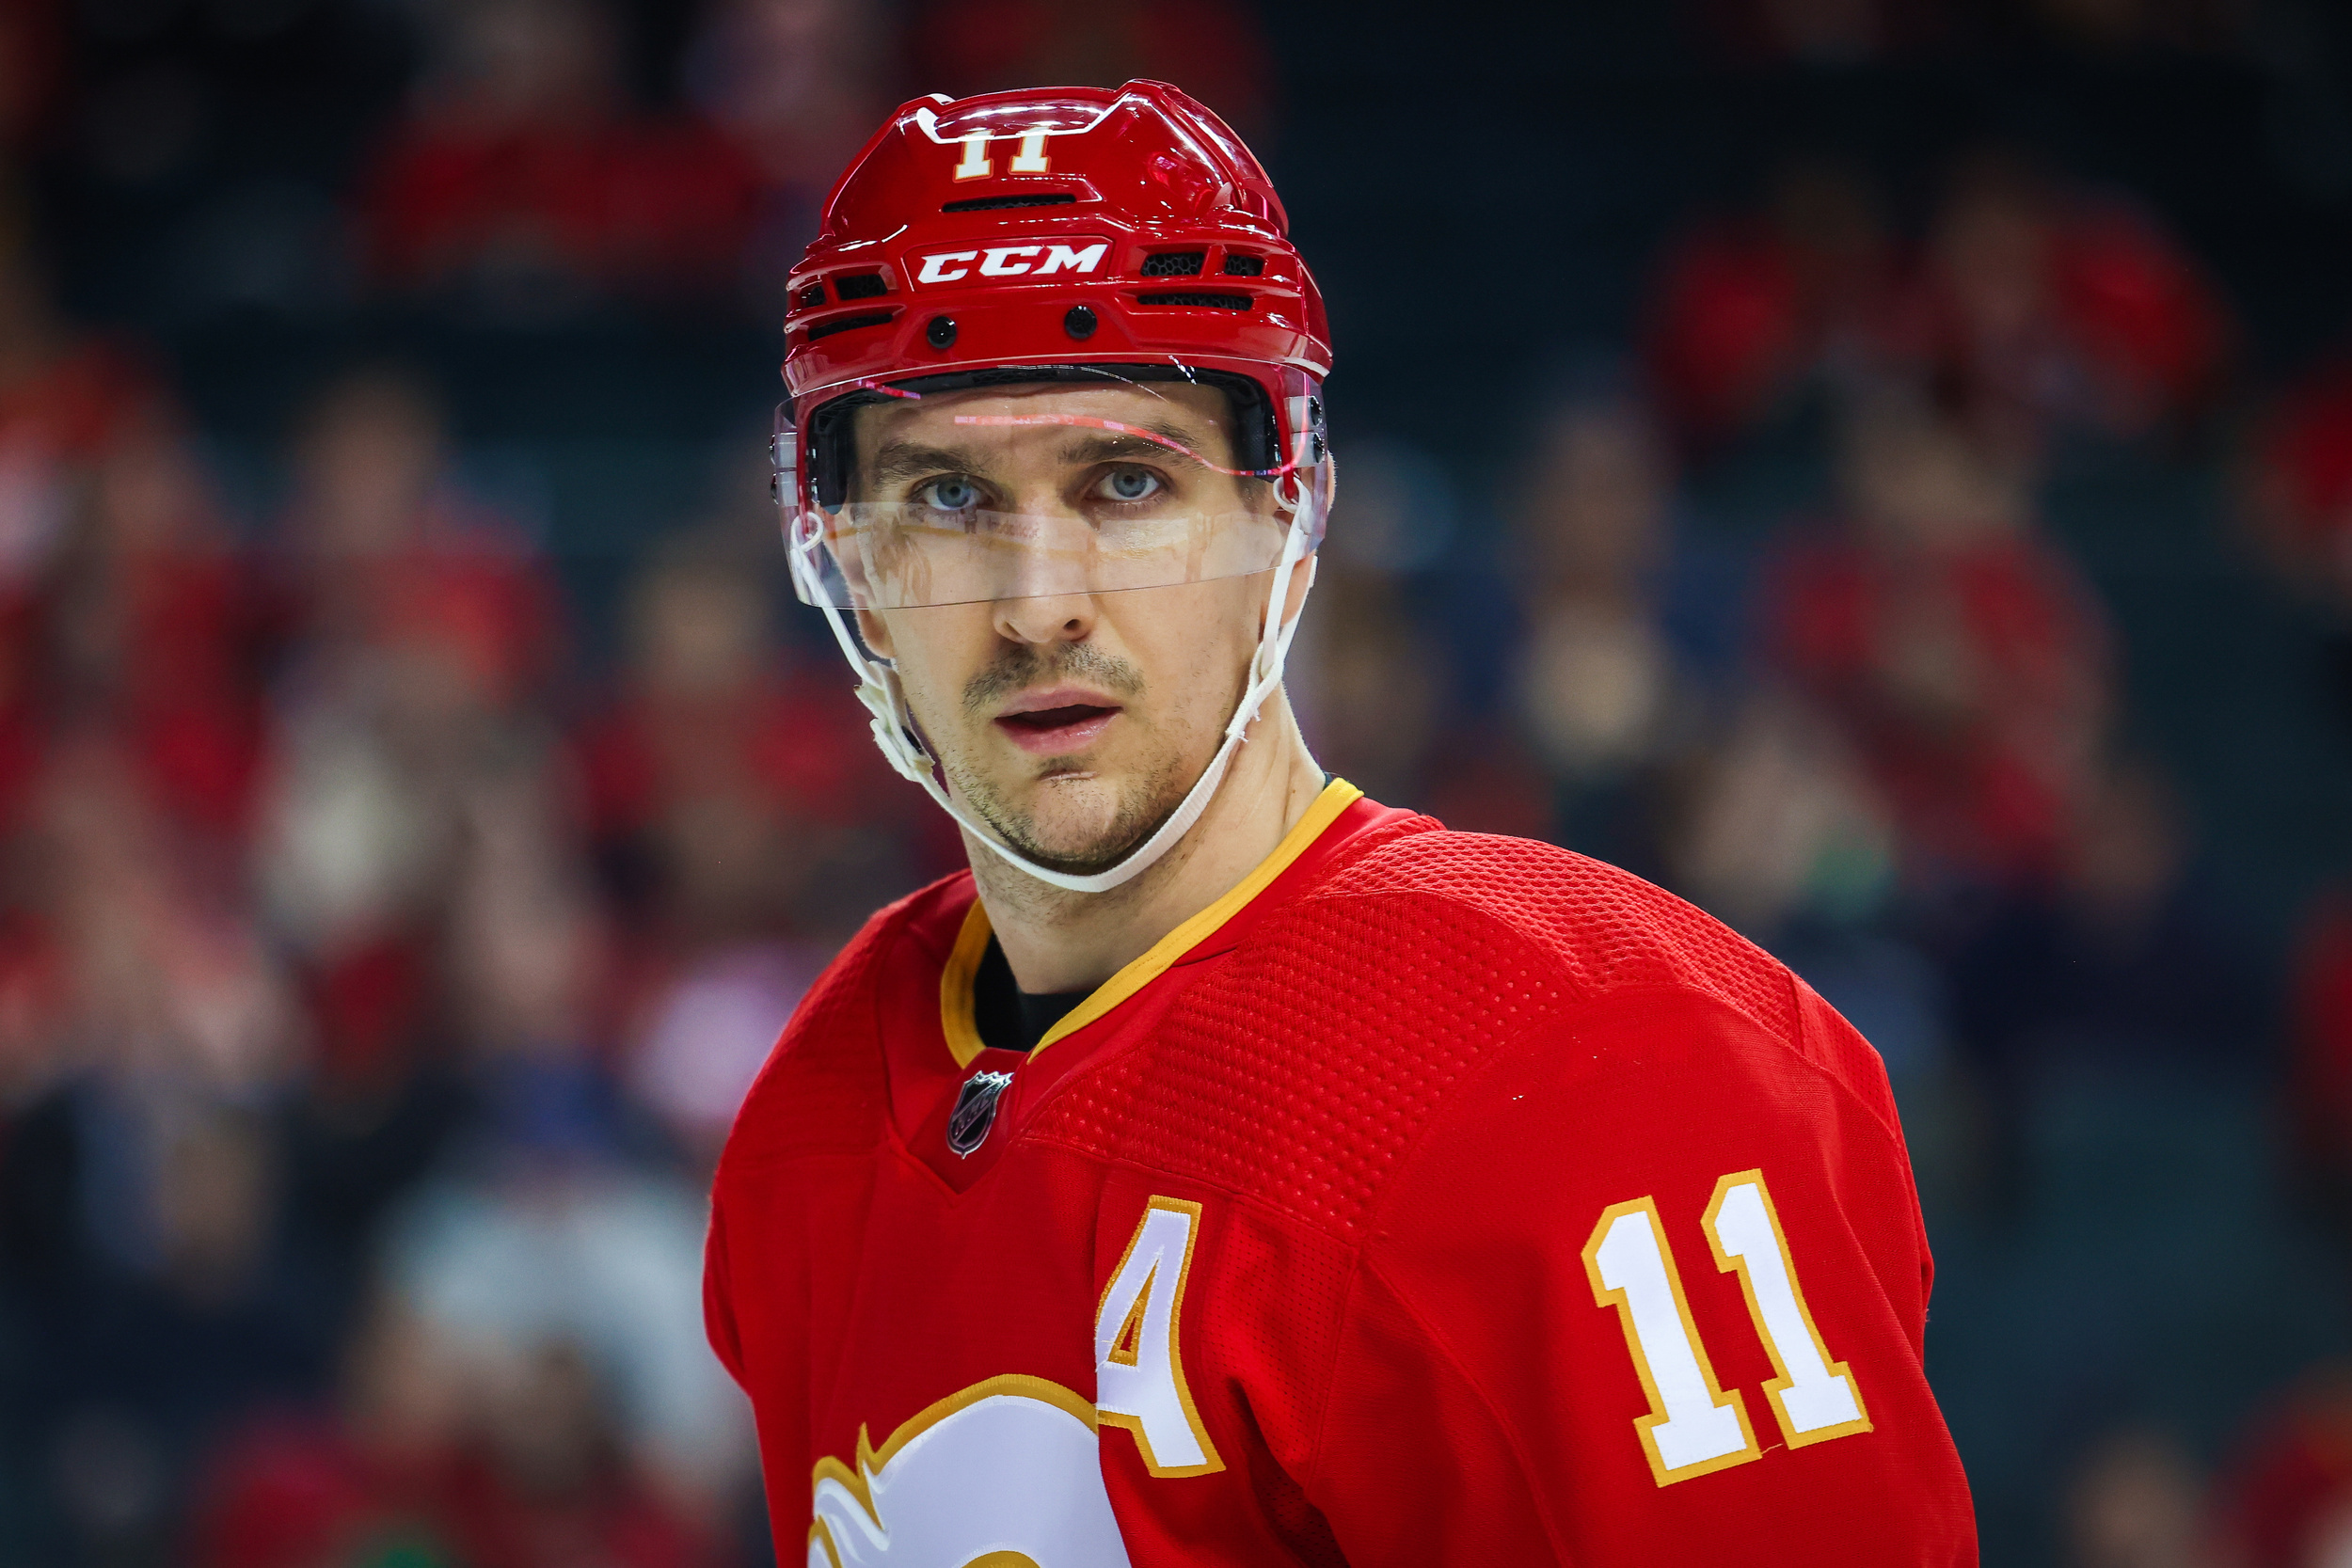 mikael backlund, anders lee, darnell nurse named finalists for 2023 king clancy trophy